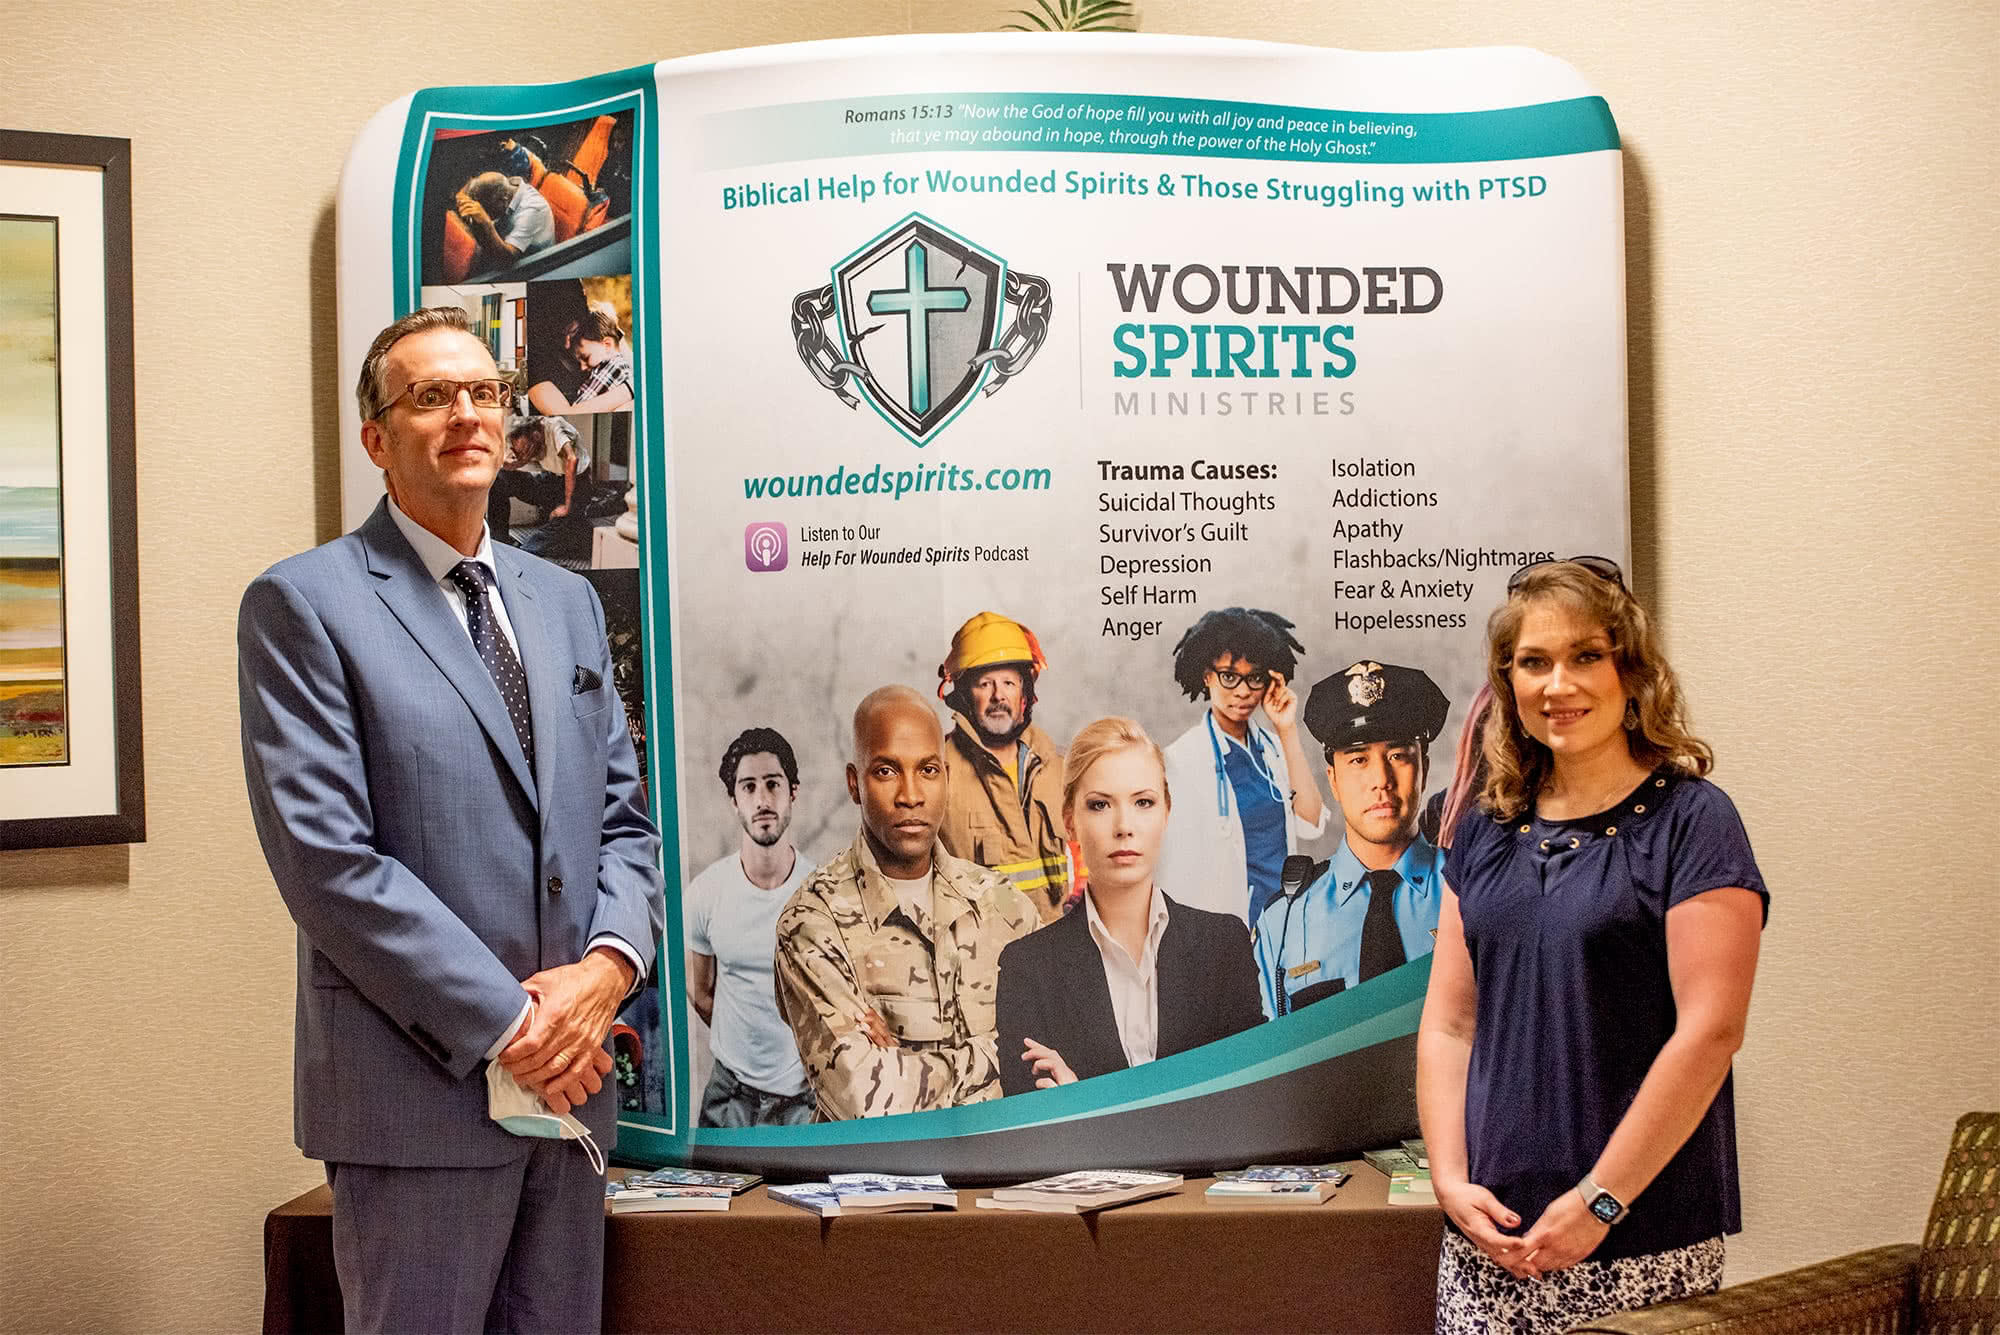 Wounded Spirits Ministries table with the Director and his wife standing in front of it